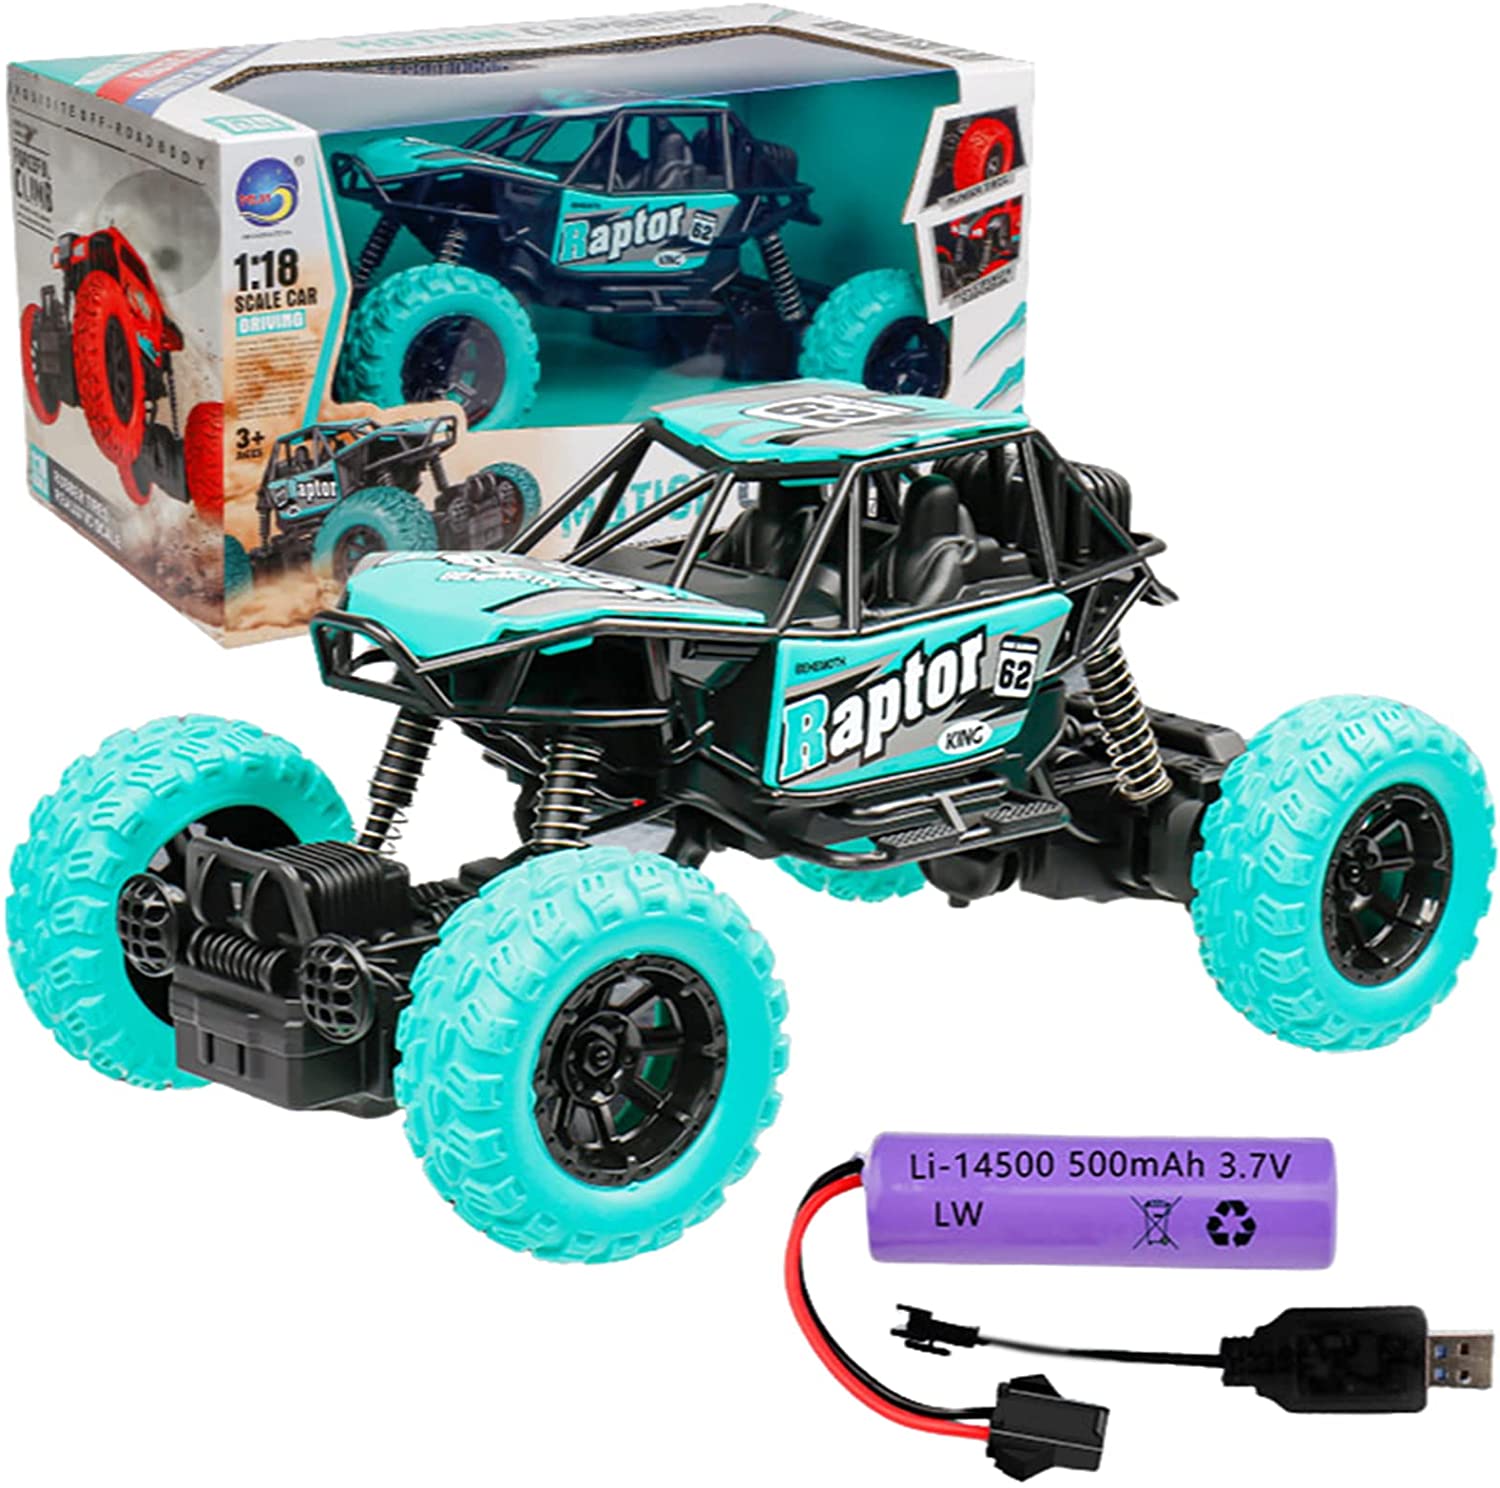 Remote Control Raptor Monster Truck 1:18 Scale Motion Climbing Cross Country RC Toy Car Tristar